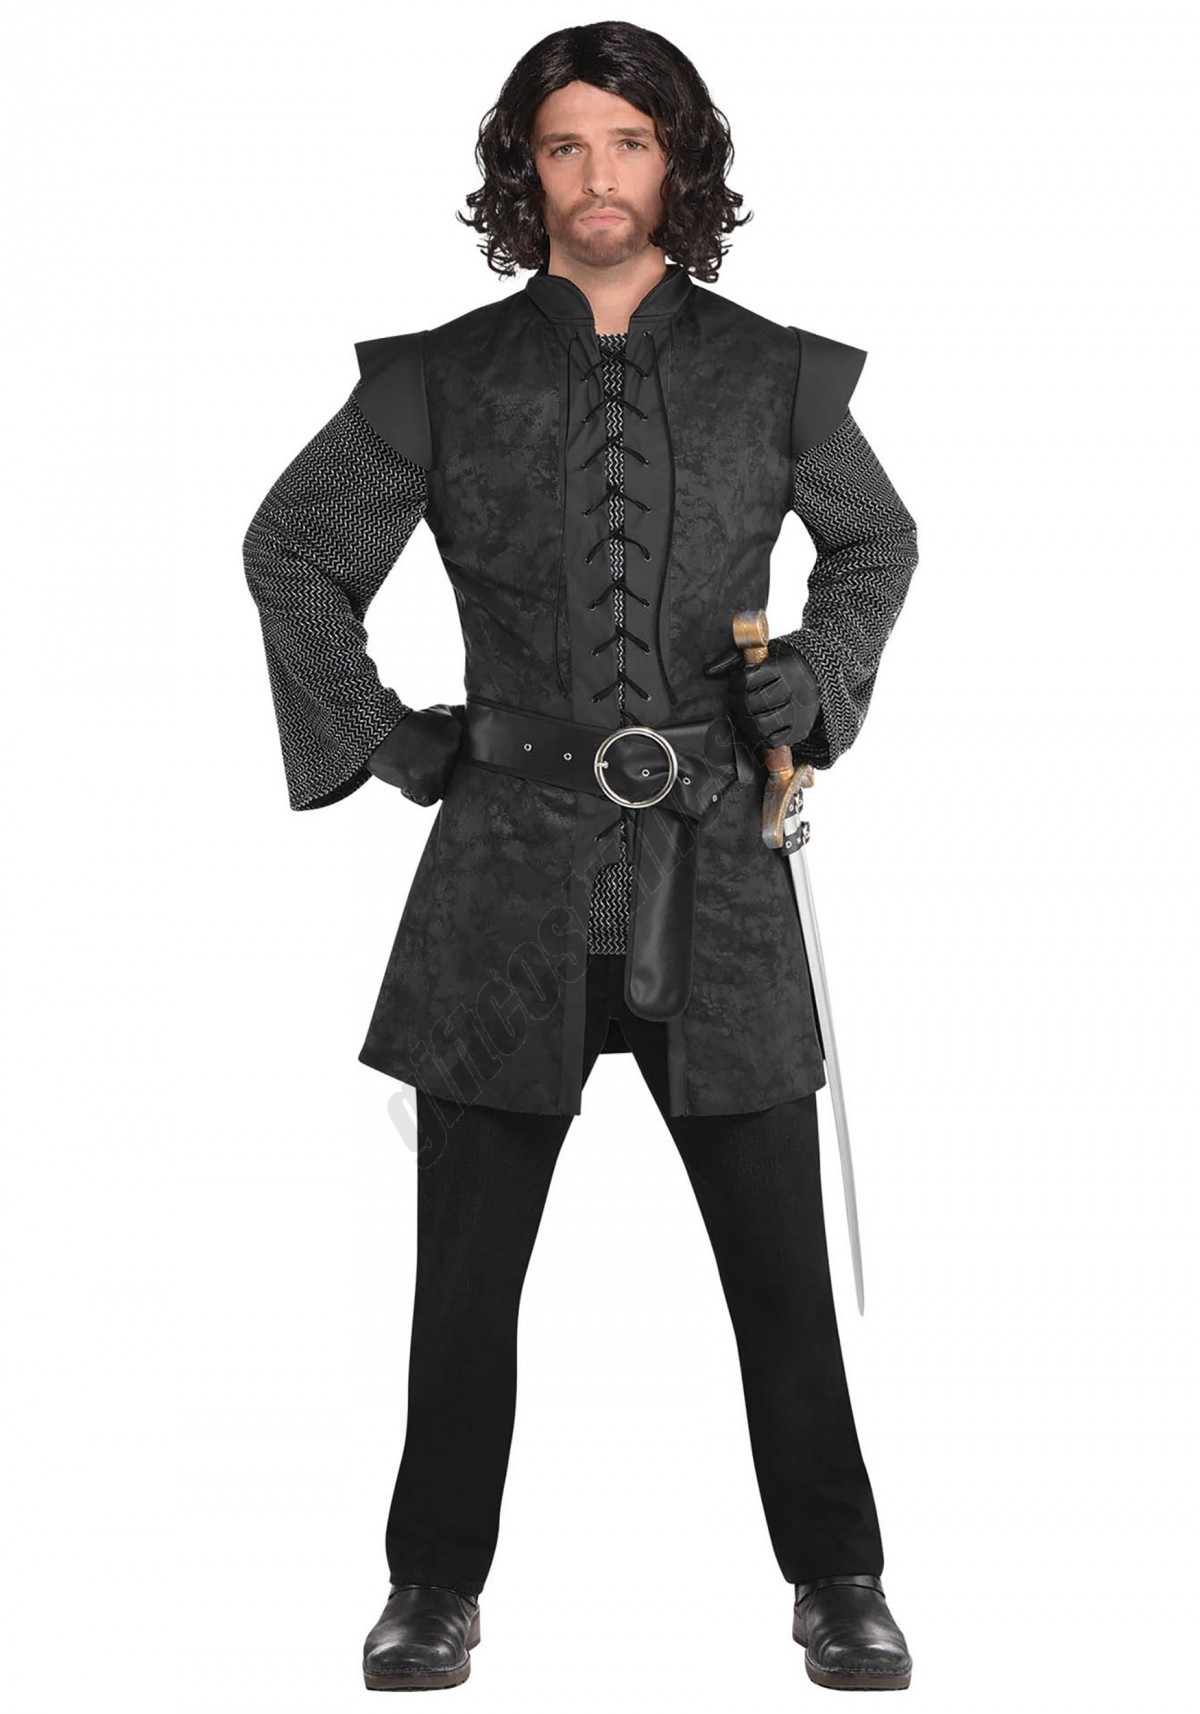 Warrior Black Tunic Adult Costume Promotions - -0